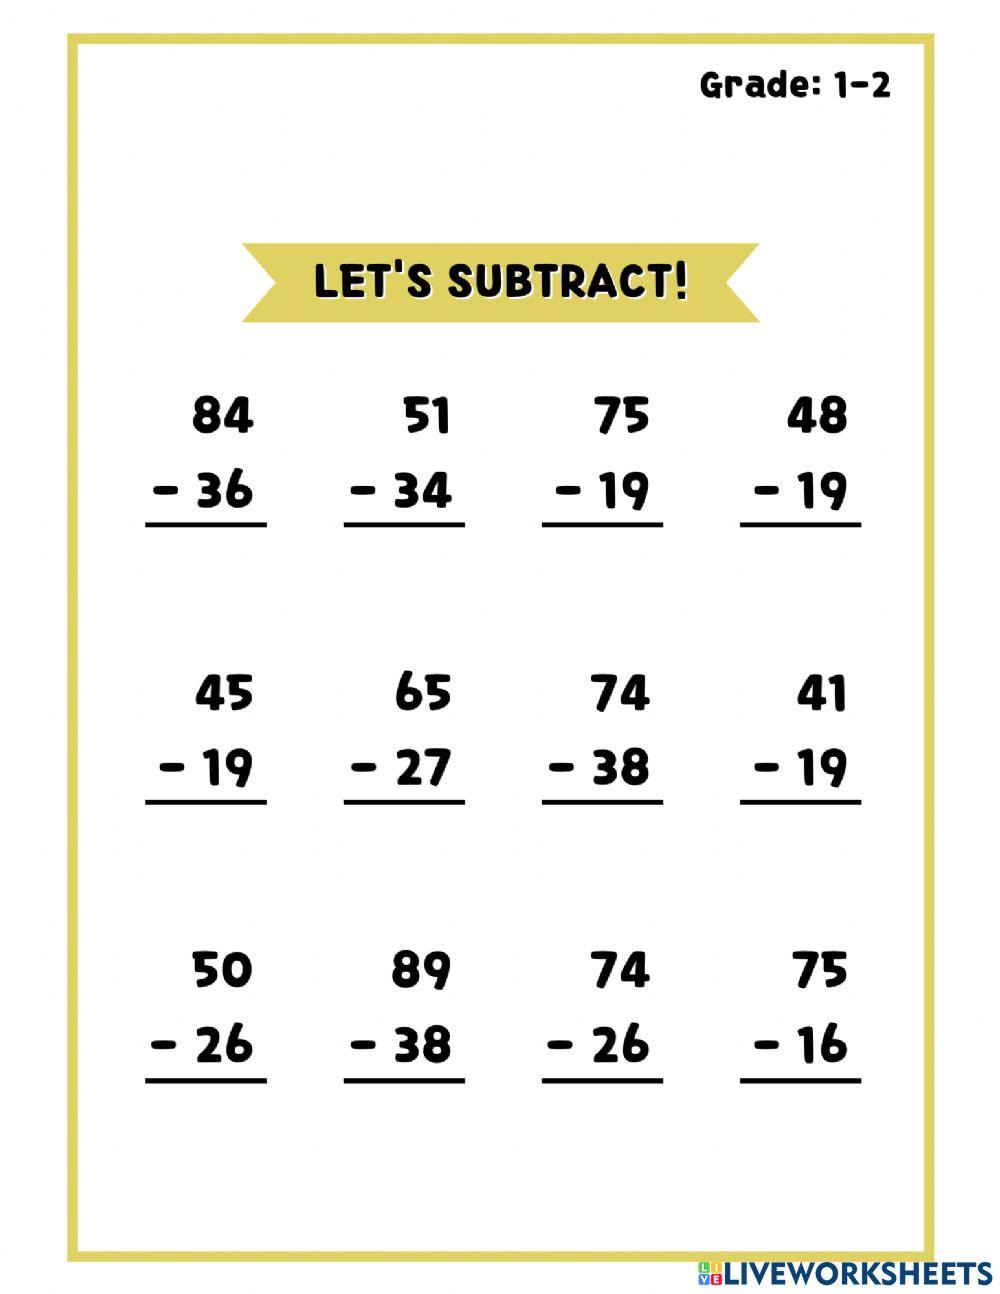 Subtraction with 2 digit numbers